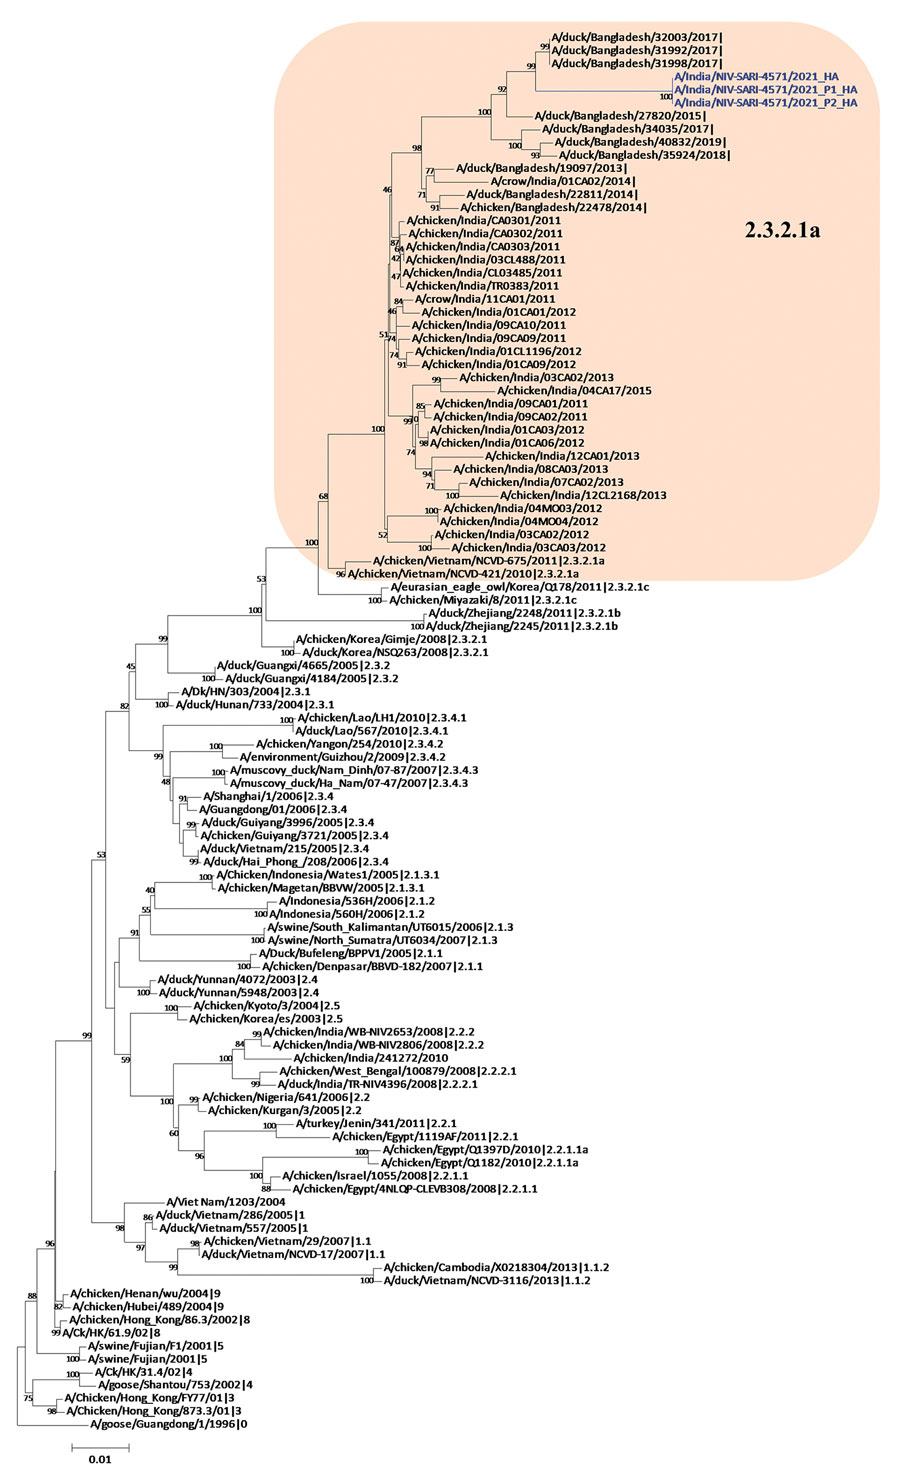 Hemagglutinin gene phylogenetic tree of avian influenza viruses, constructed using the neighbor-joining method as implemented in MEGA 7 (https://www.megasoftware.net). Blue text indicates the study strains (clinical and isolate); shaded area represents the Bangladesh and India strains in clade 2.3.2.1a. Gs/Guangdong/1/96 was used as the outgroup sequence. Scale bar indicates number of nucleotide substitutions per site.